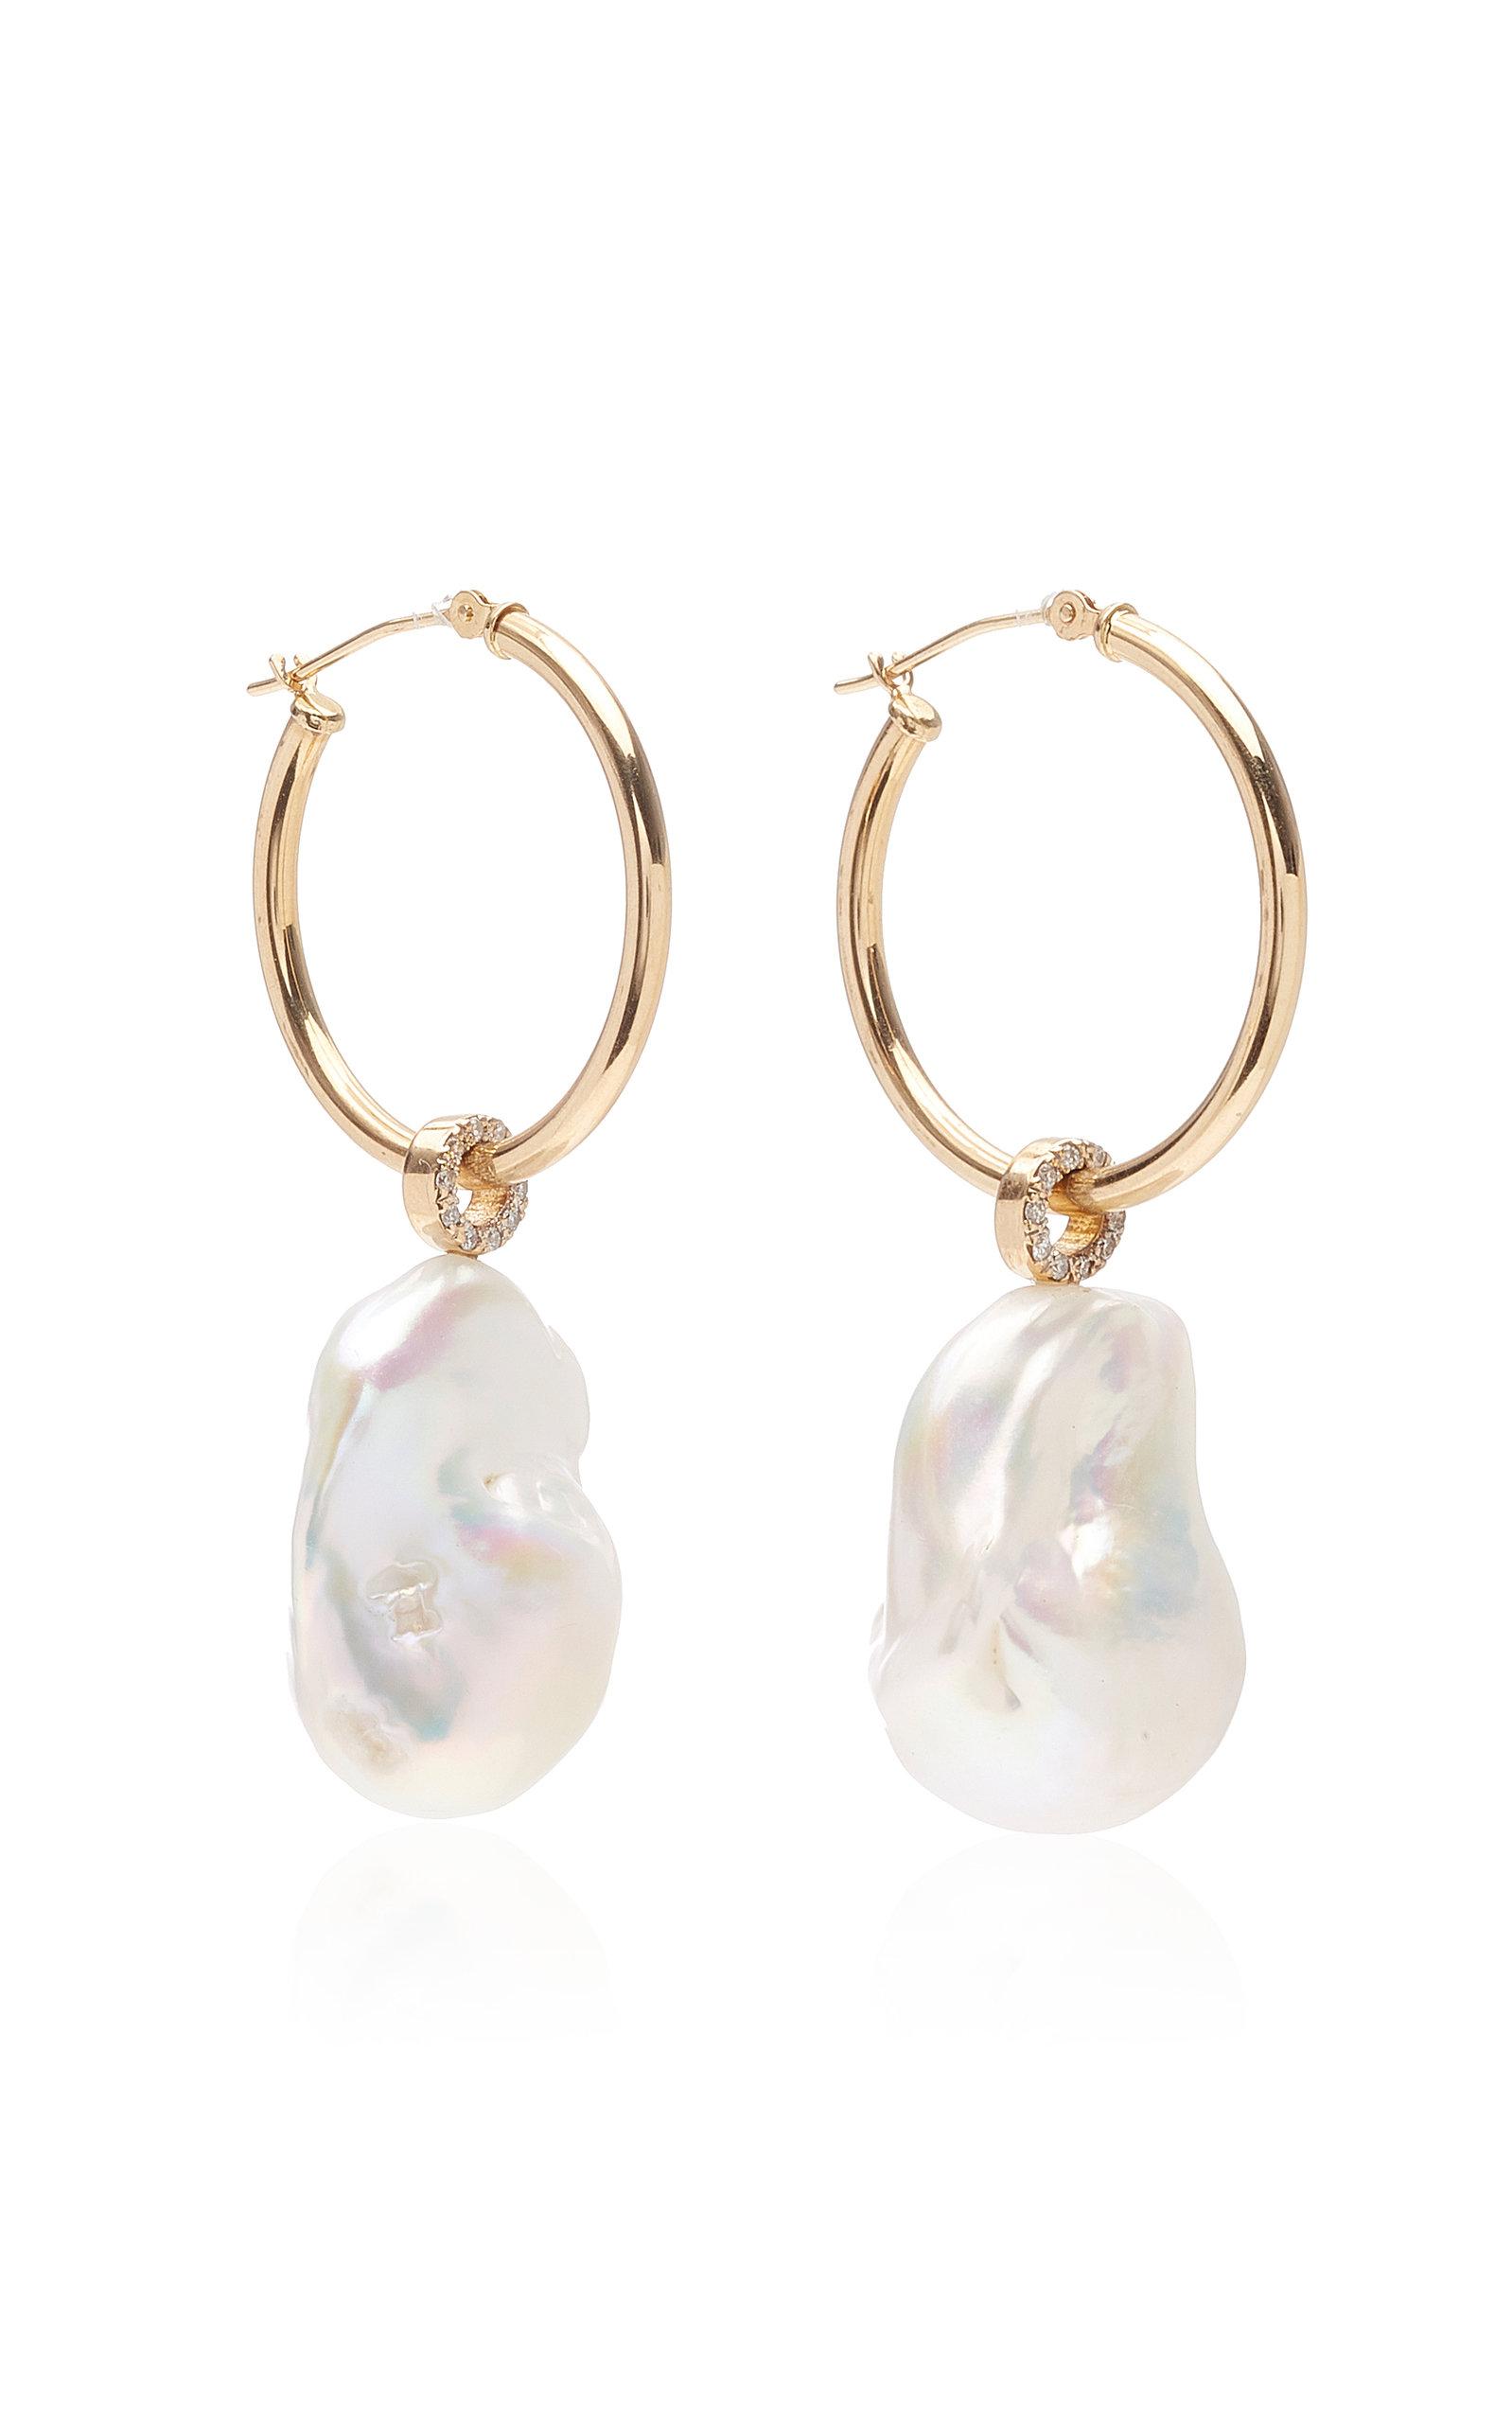 Details about   14k Yellow Gold Madi K 4-5mm White Button Freshwater Cultured Pearl Post Earring 